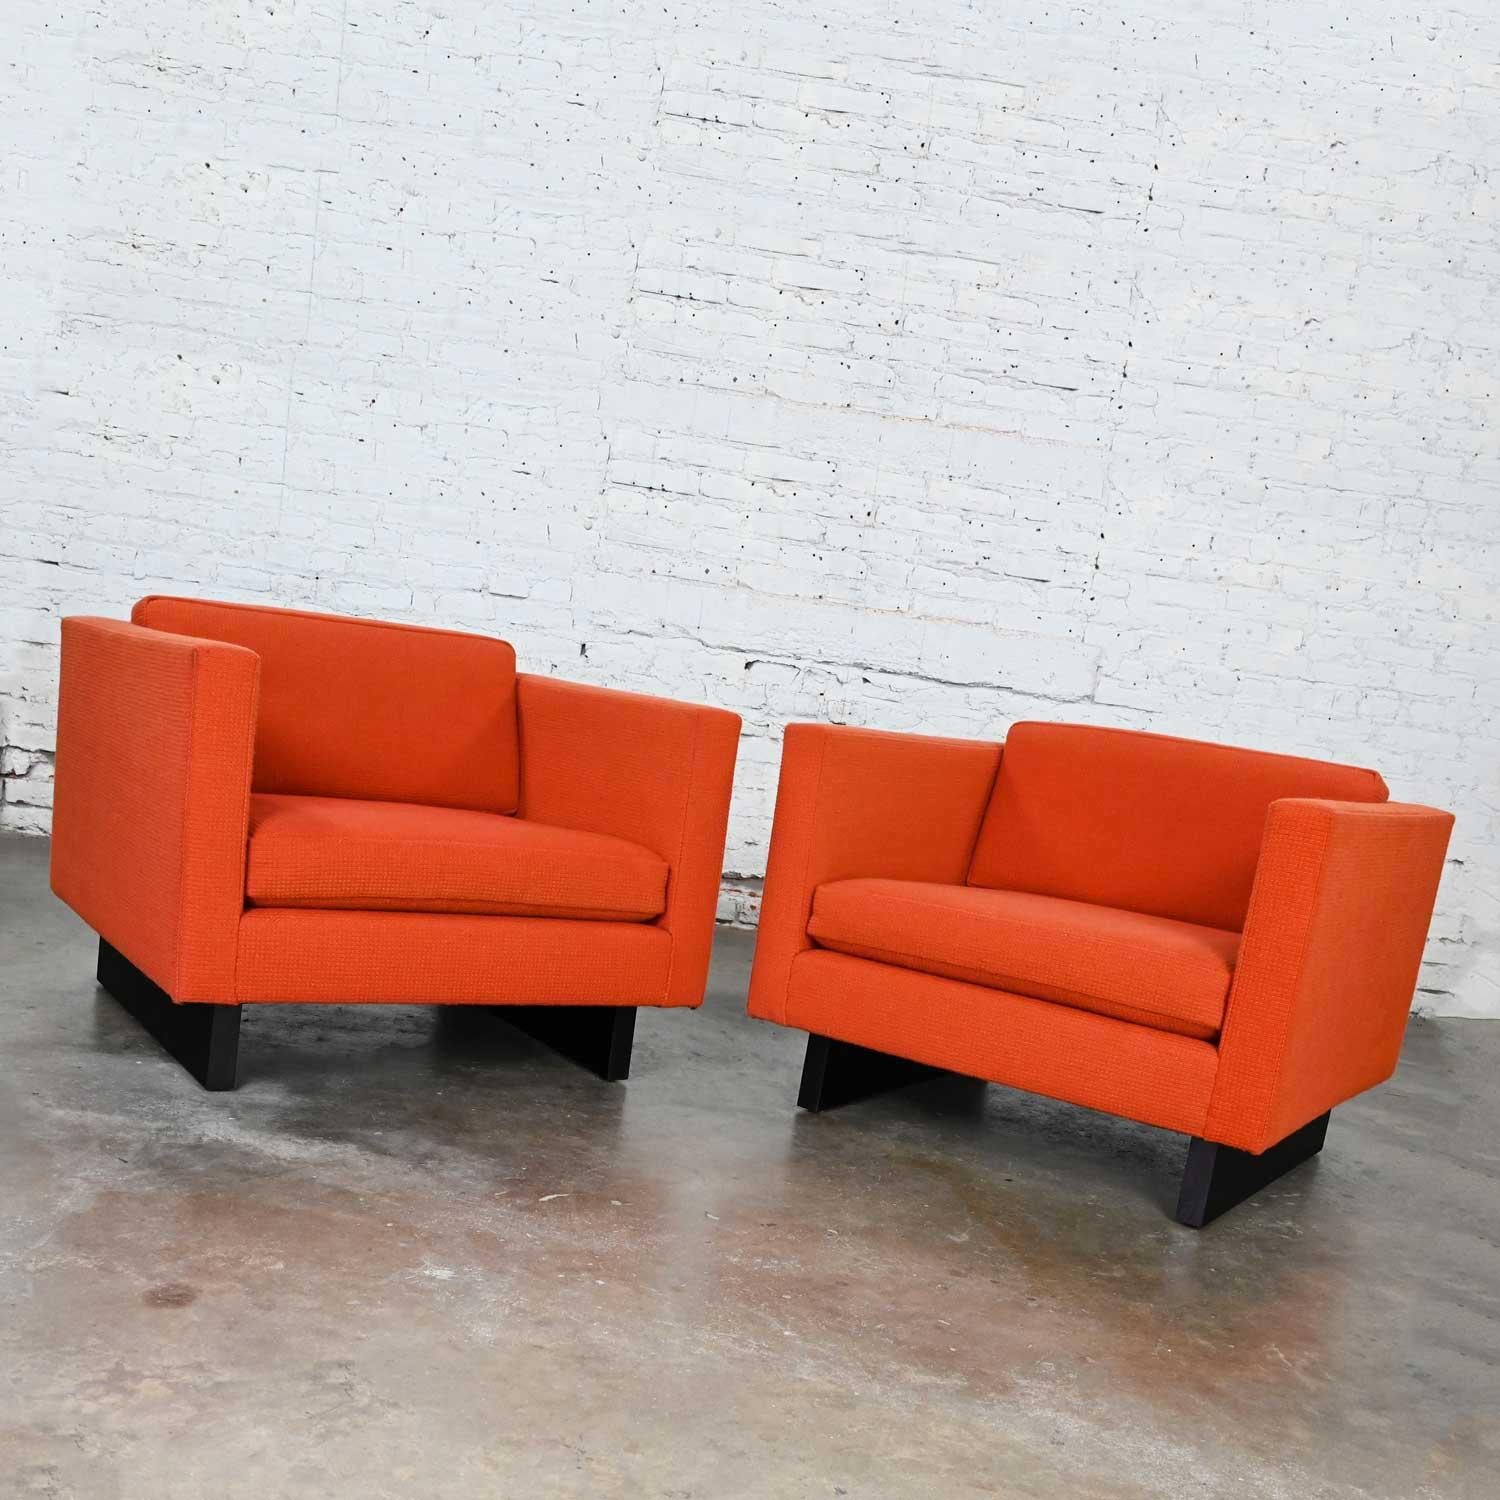 1970s Mcm to Modern Harvey Probber Club Chairs Orange 1571 Tuxedo Sleigh Bases For Sale 6